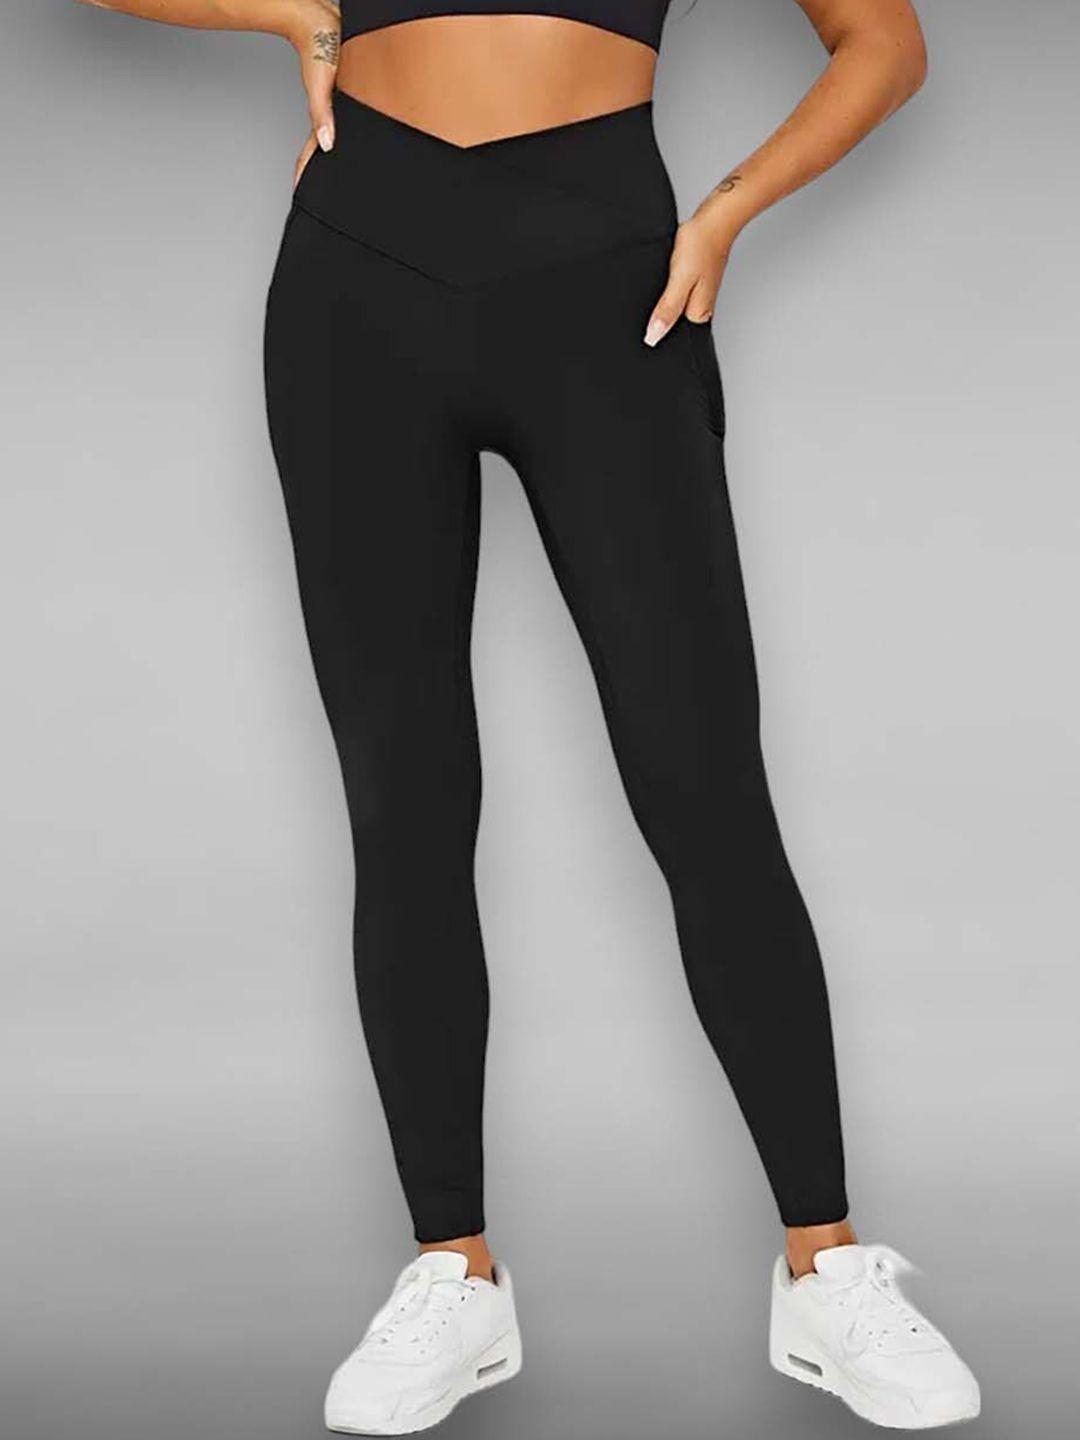 imperative women antimicrobial ankle-length gym tights